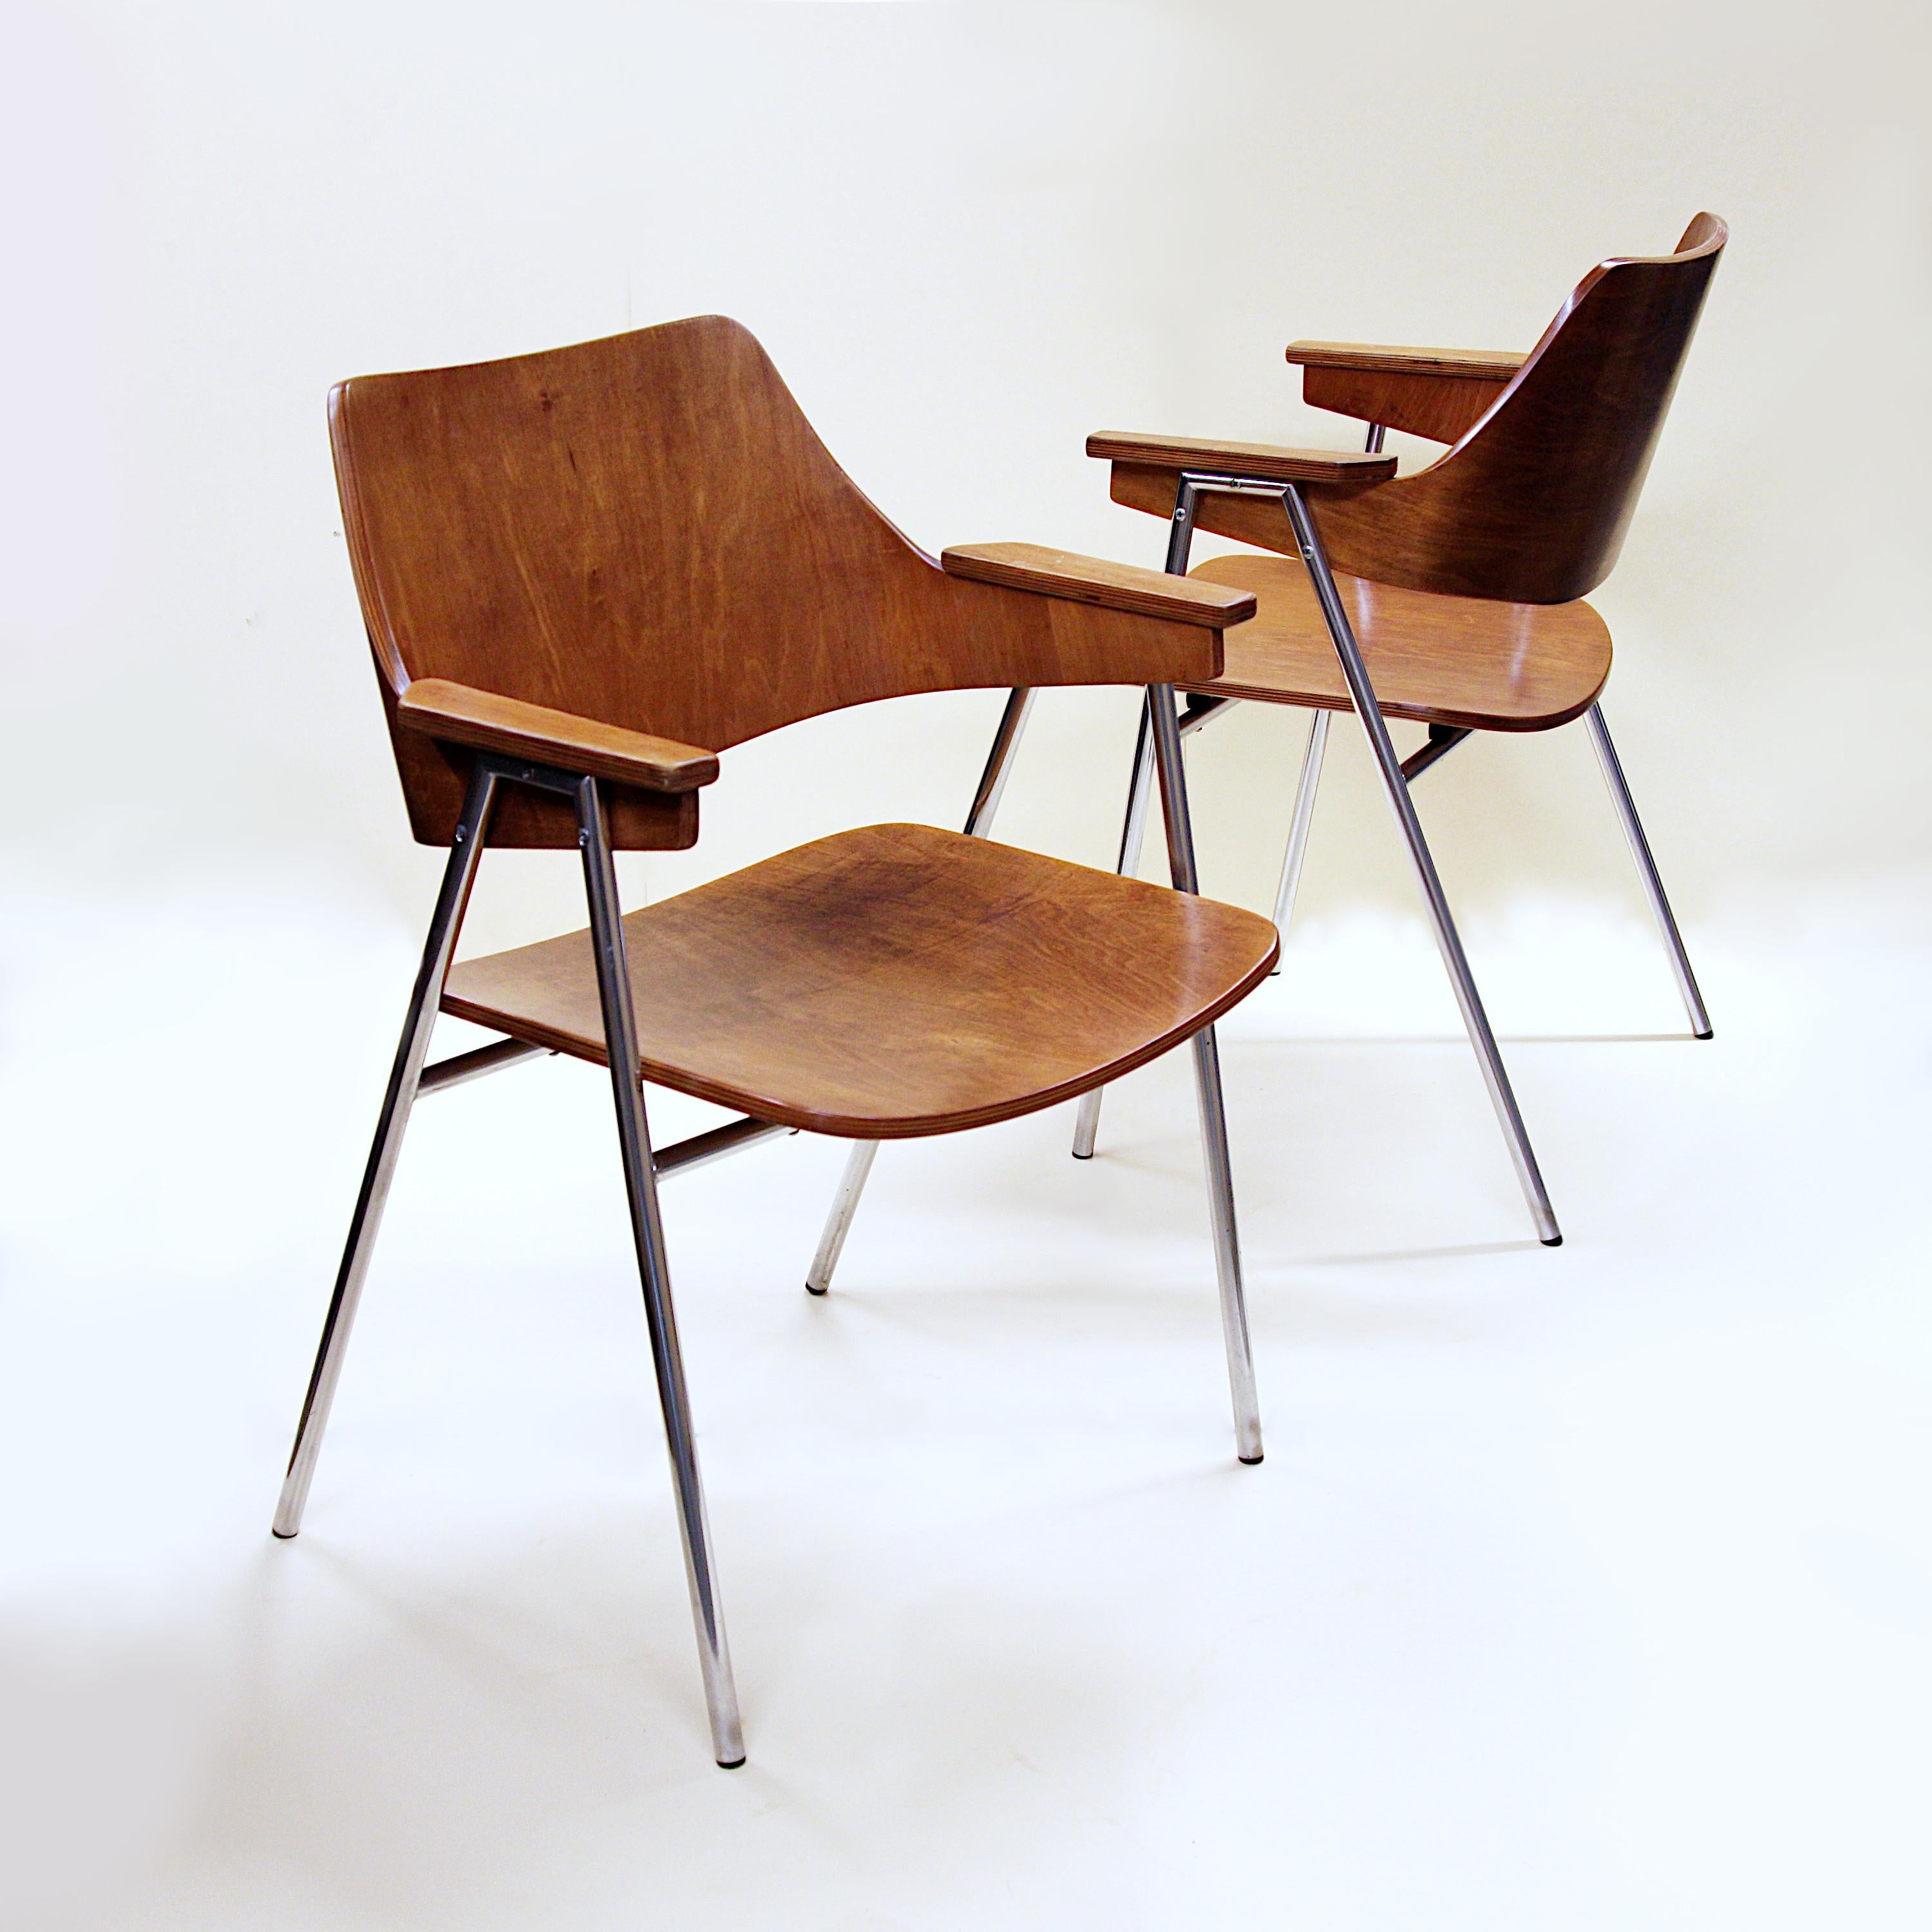 Wonderful pair of side chairs designed by Hanno Von Gustedt for Thonet from the late 1950s. Essentially a rare, early version of the S636 with bent-plywood seats and backs. Great looking chairs that would make a spectacular addition to any interior!